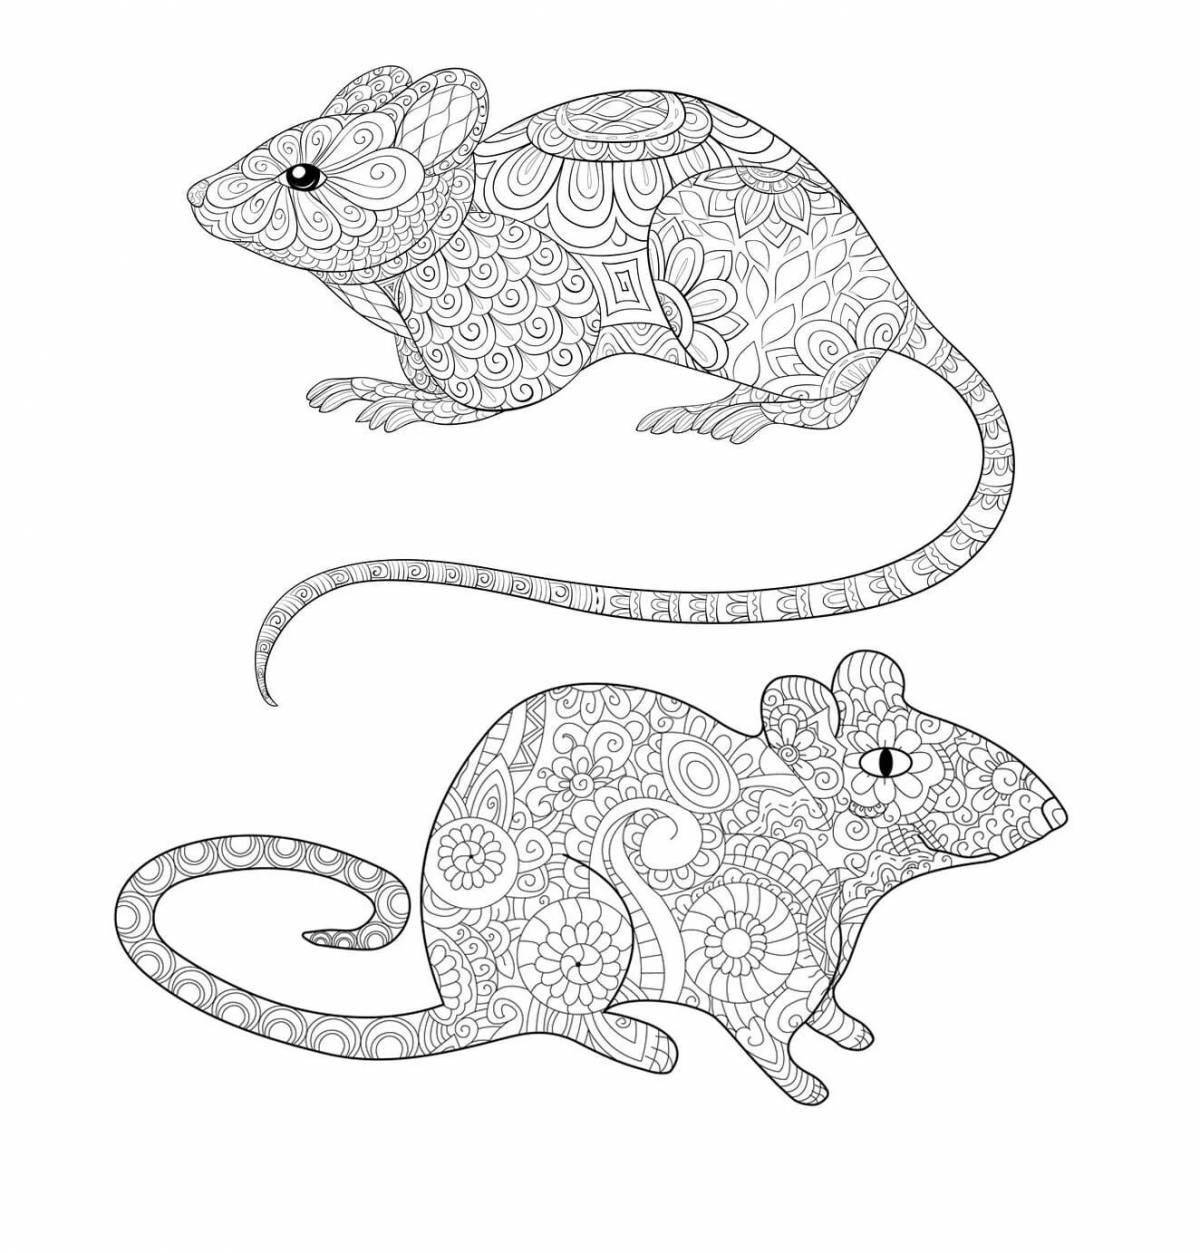 Cool mouse coloring book for kids 3-4 years old